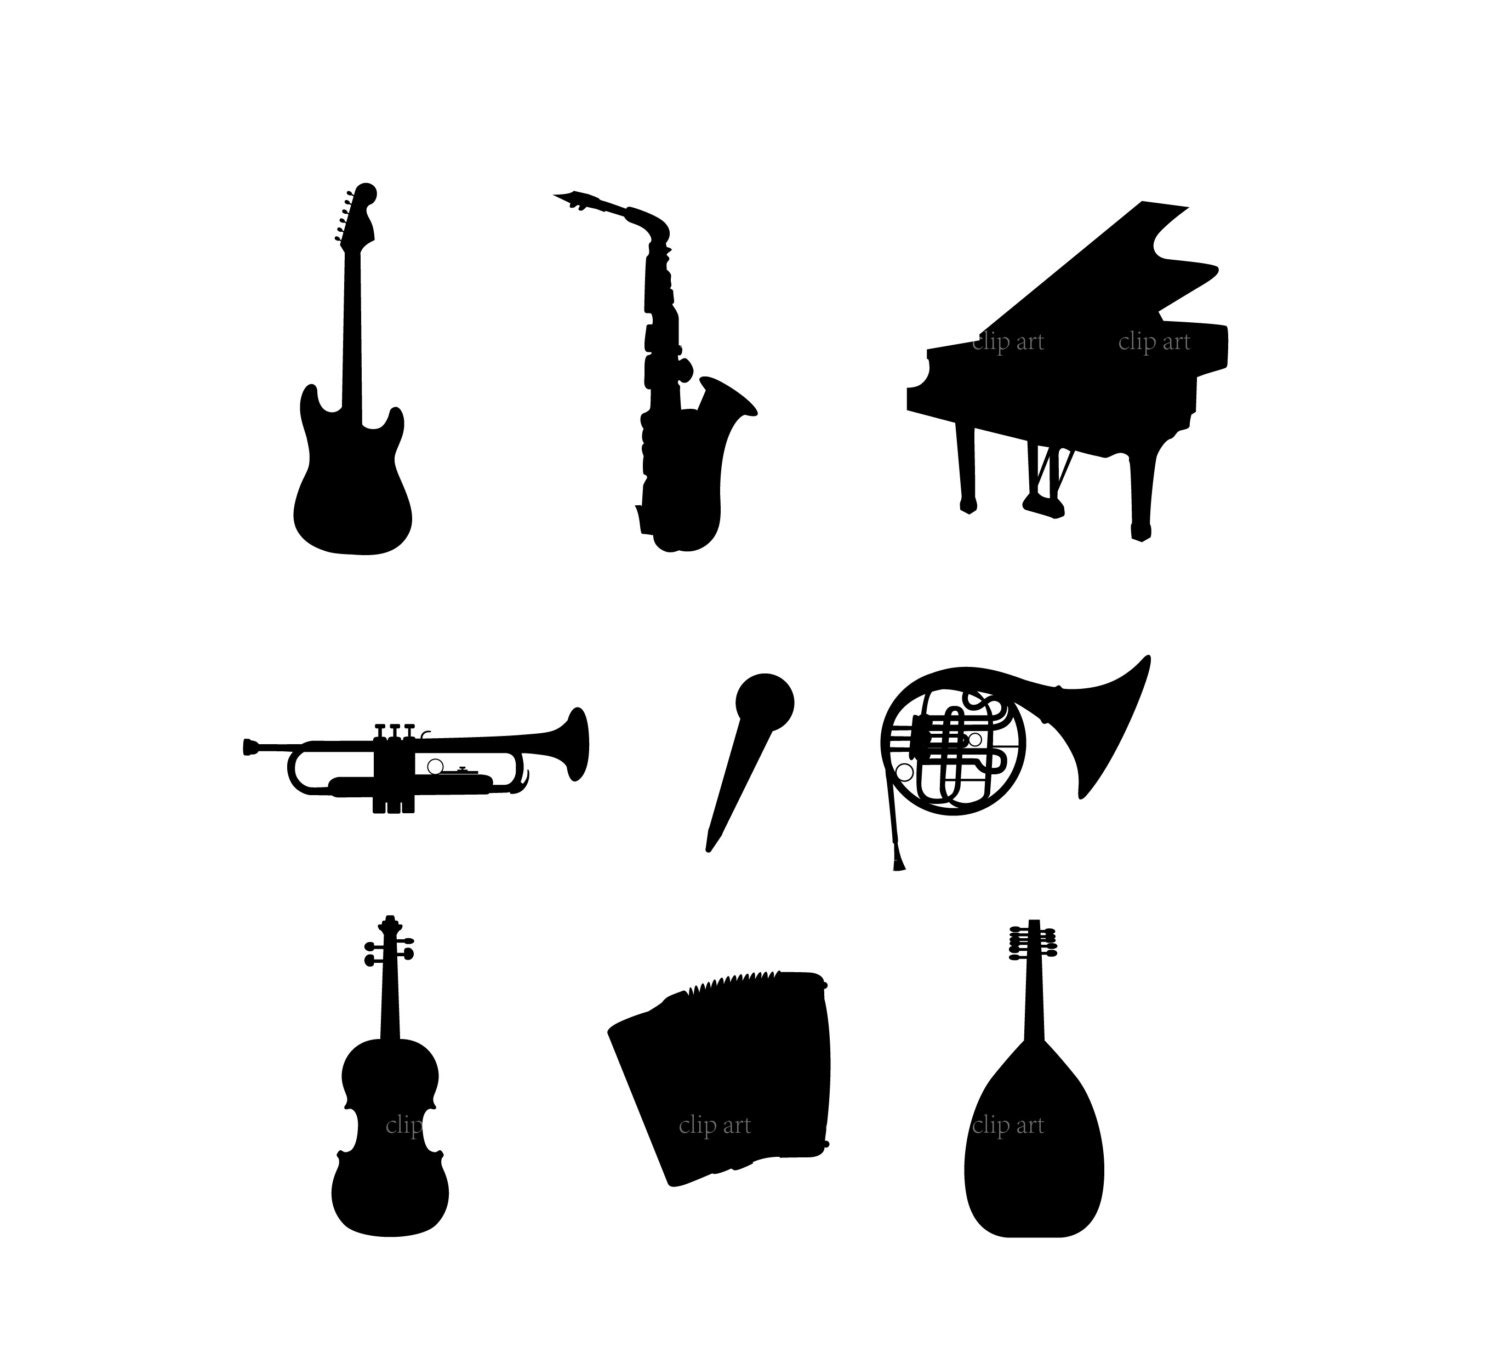 clipart of music notes and instruments - photo #28